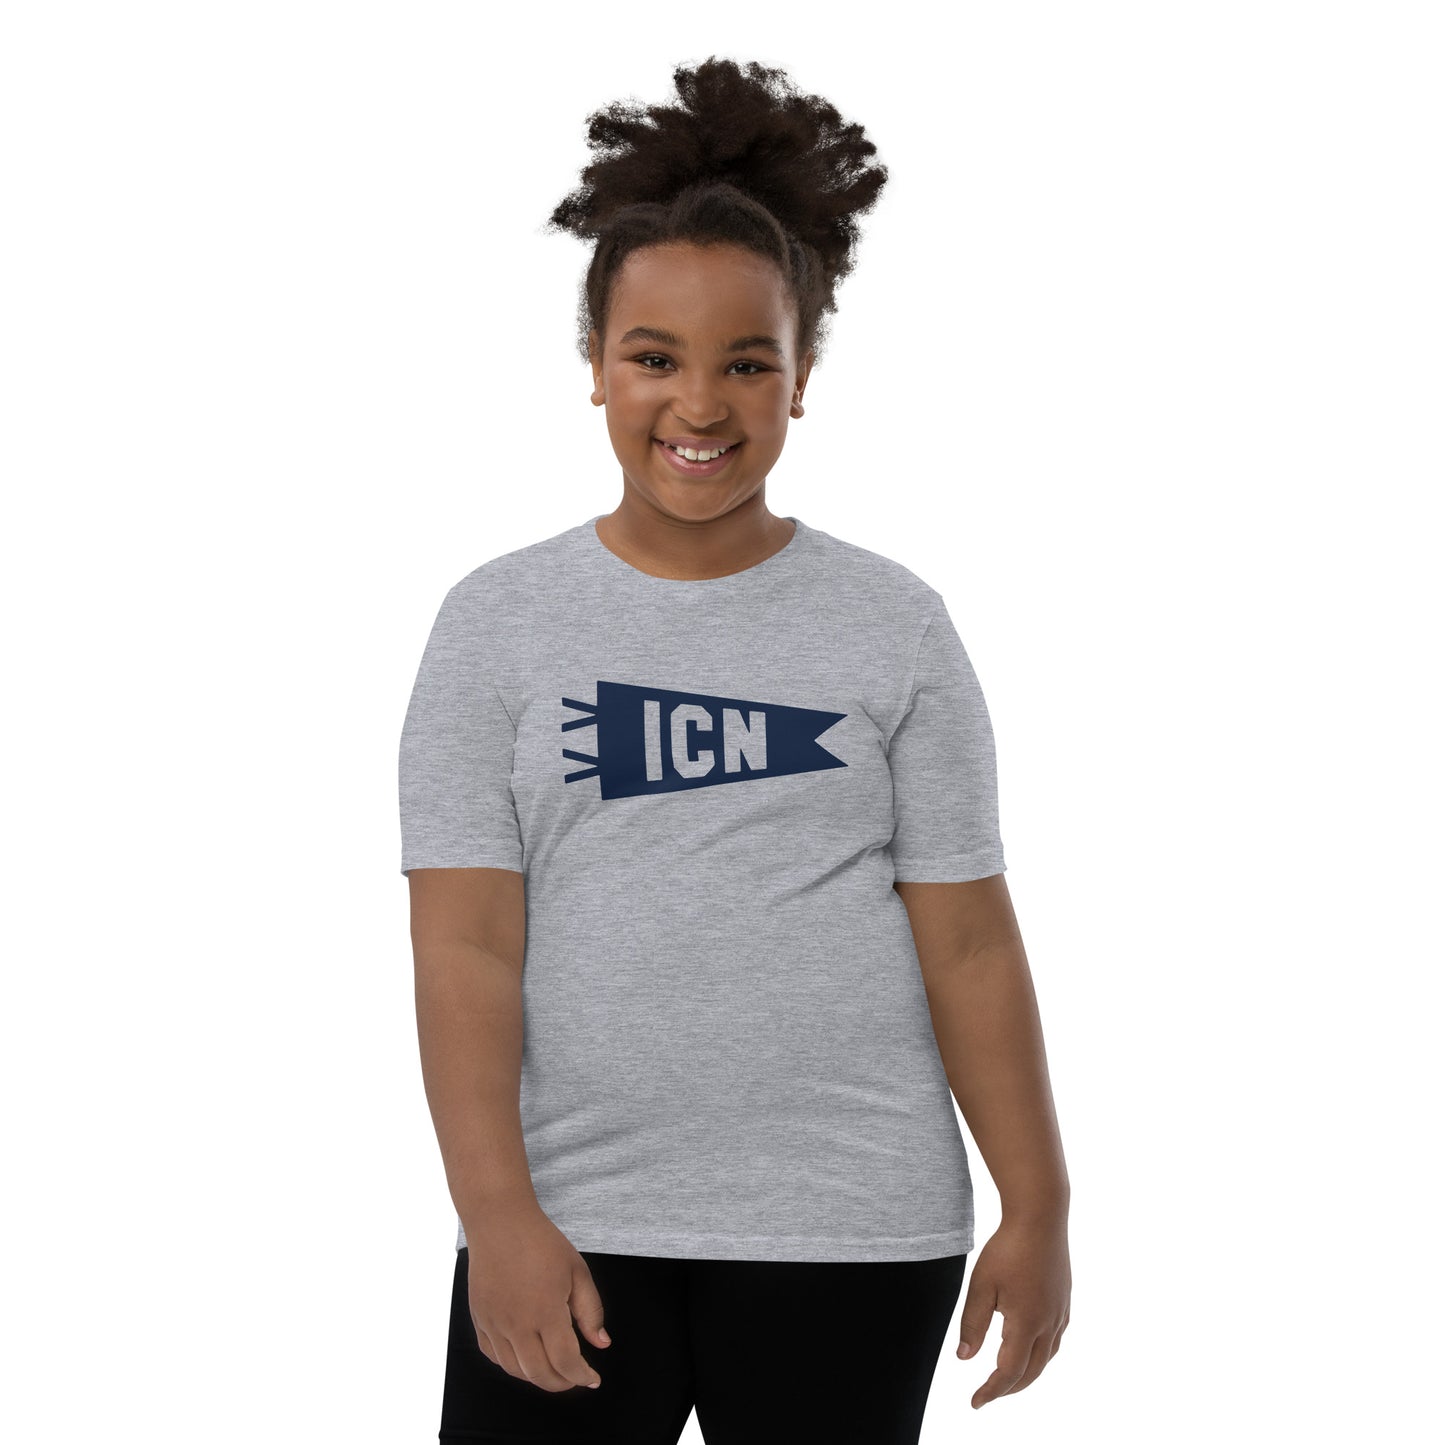 Kid's Airport Code Tee - Navy Blue Graphic • ICN Seoul • YHM Designs - Image 05